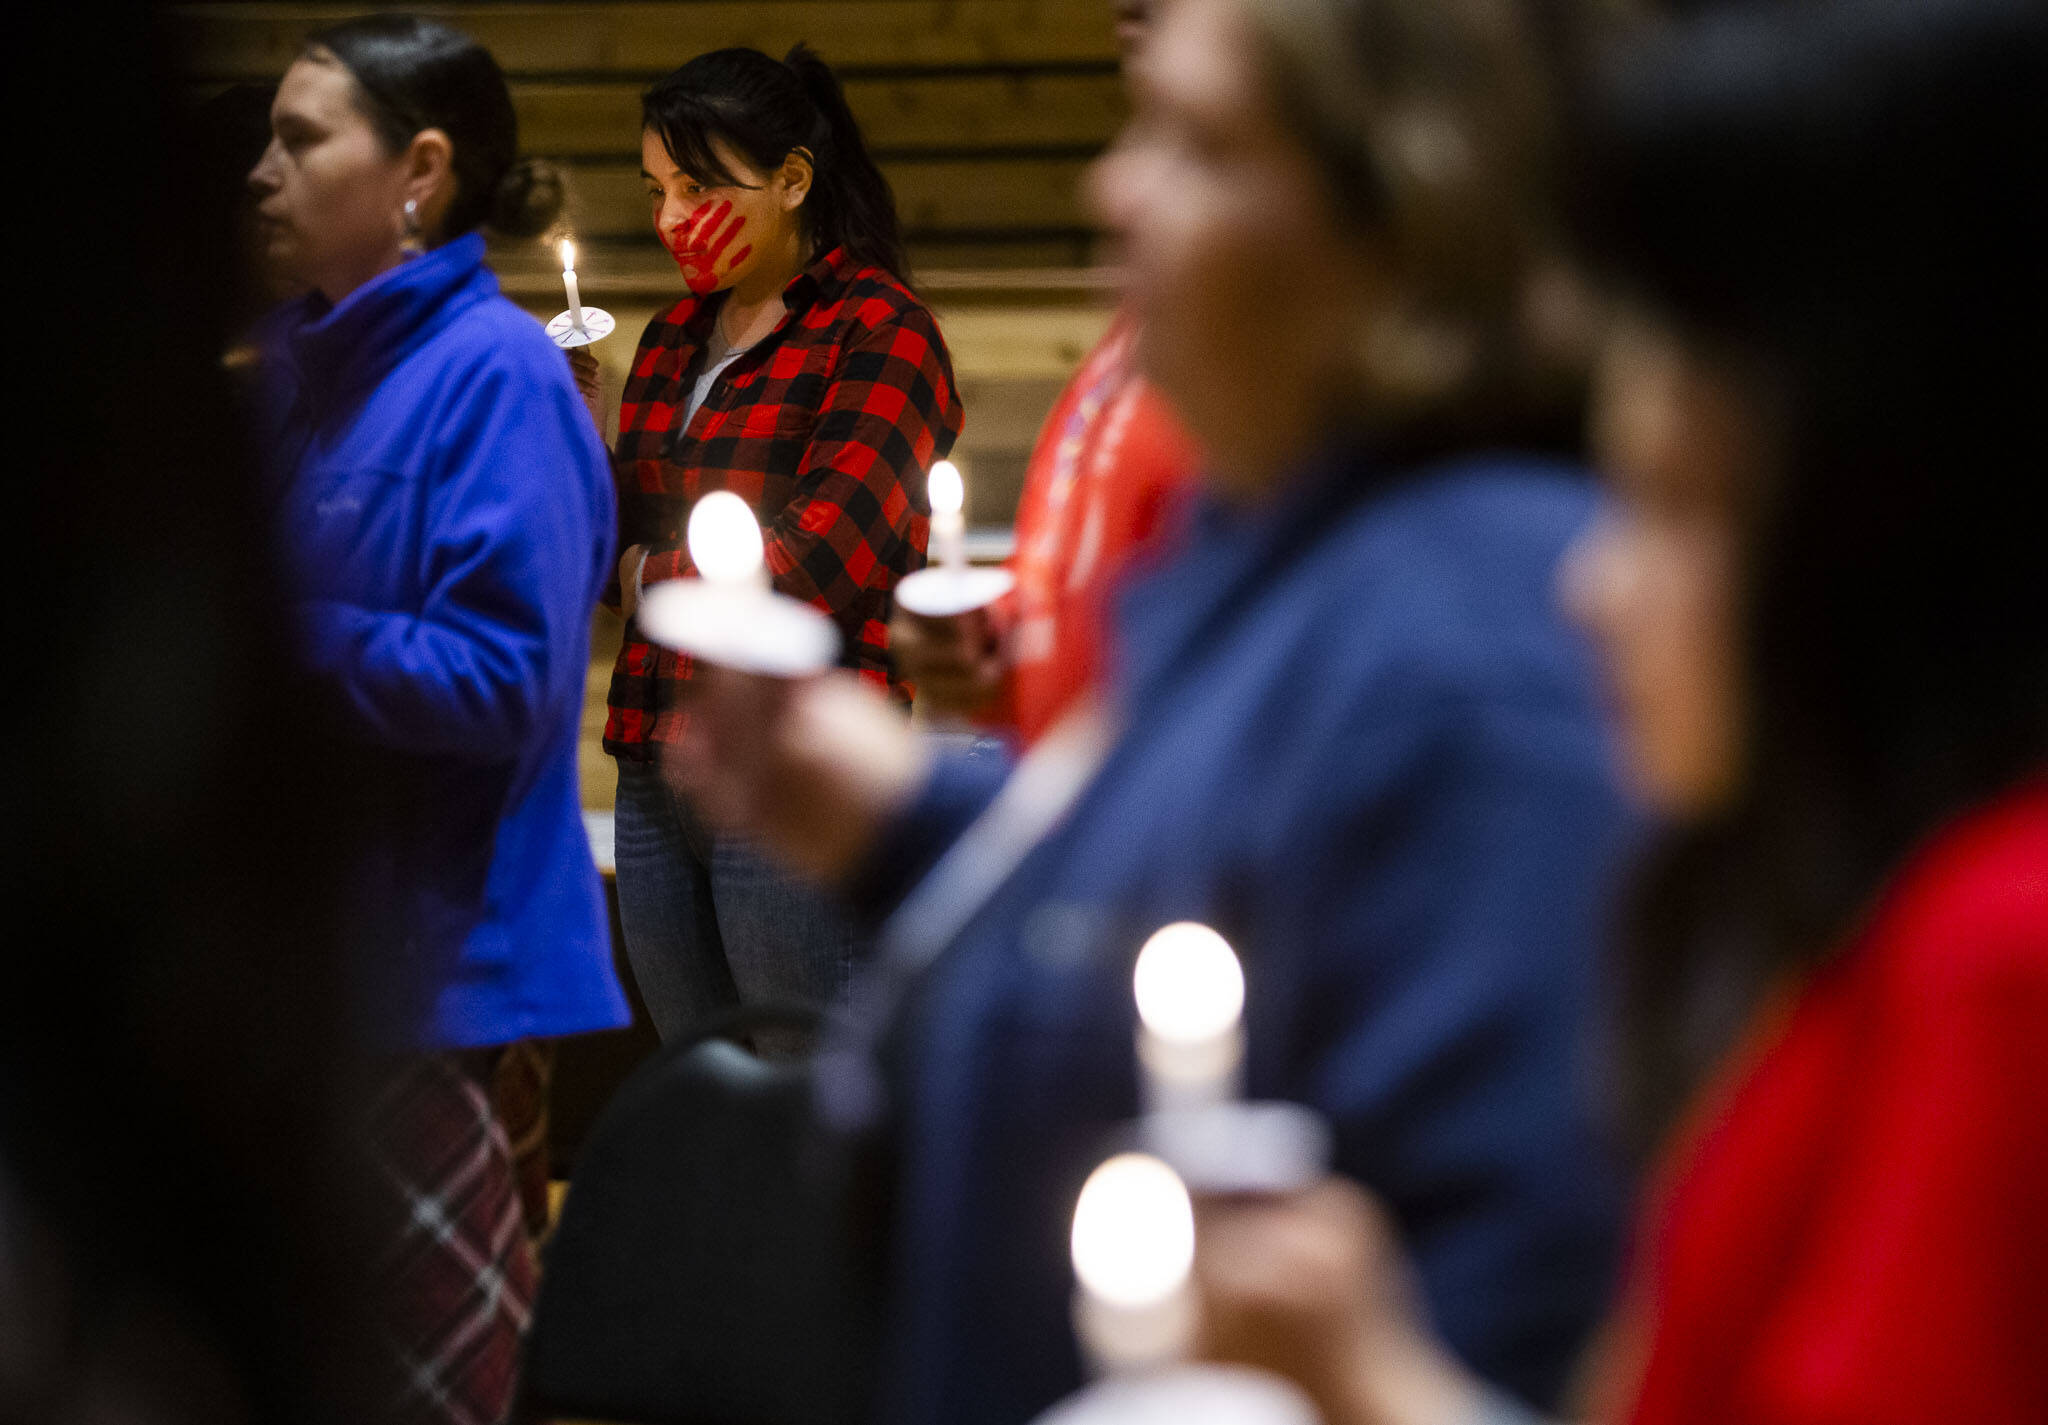 Taleen Enick, 15, holds a candle during a MMIW candlelight vigil at the Tulalip Gathering Hall on Thursday in Tulalip. (Olivia Vanni / The Herald)